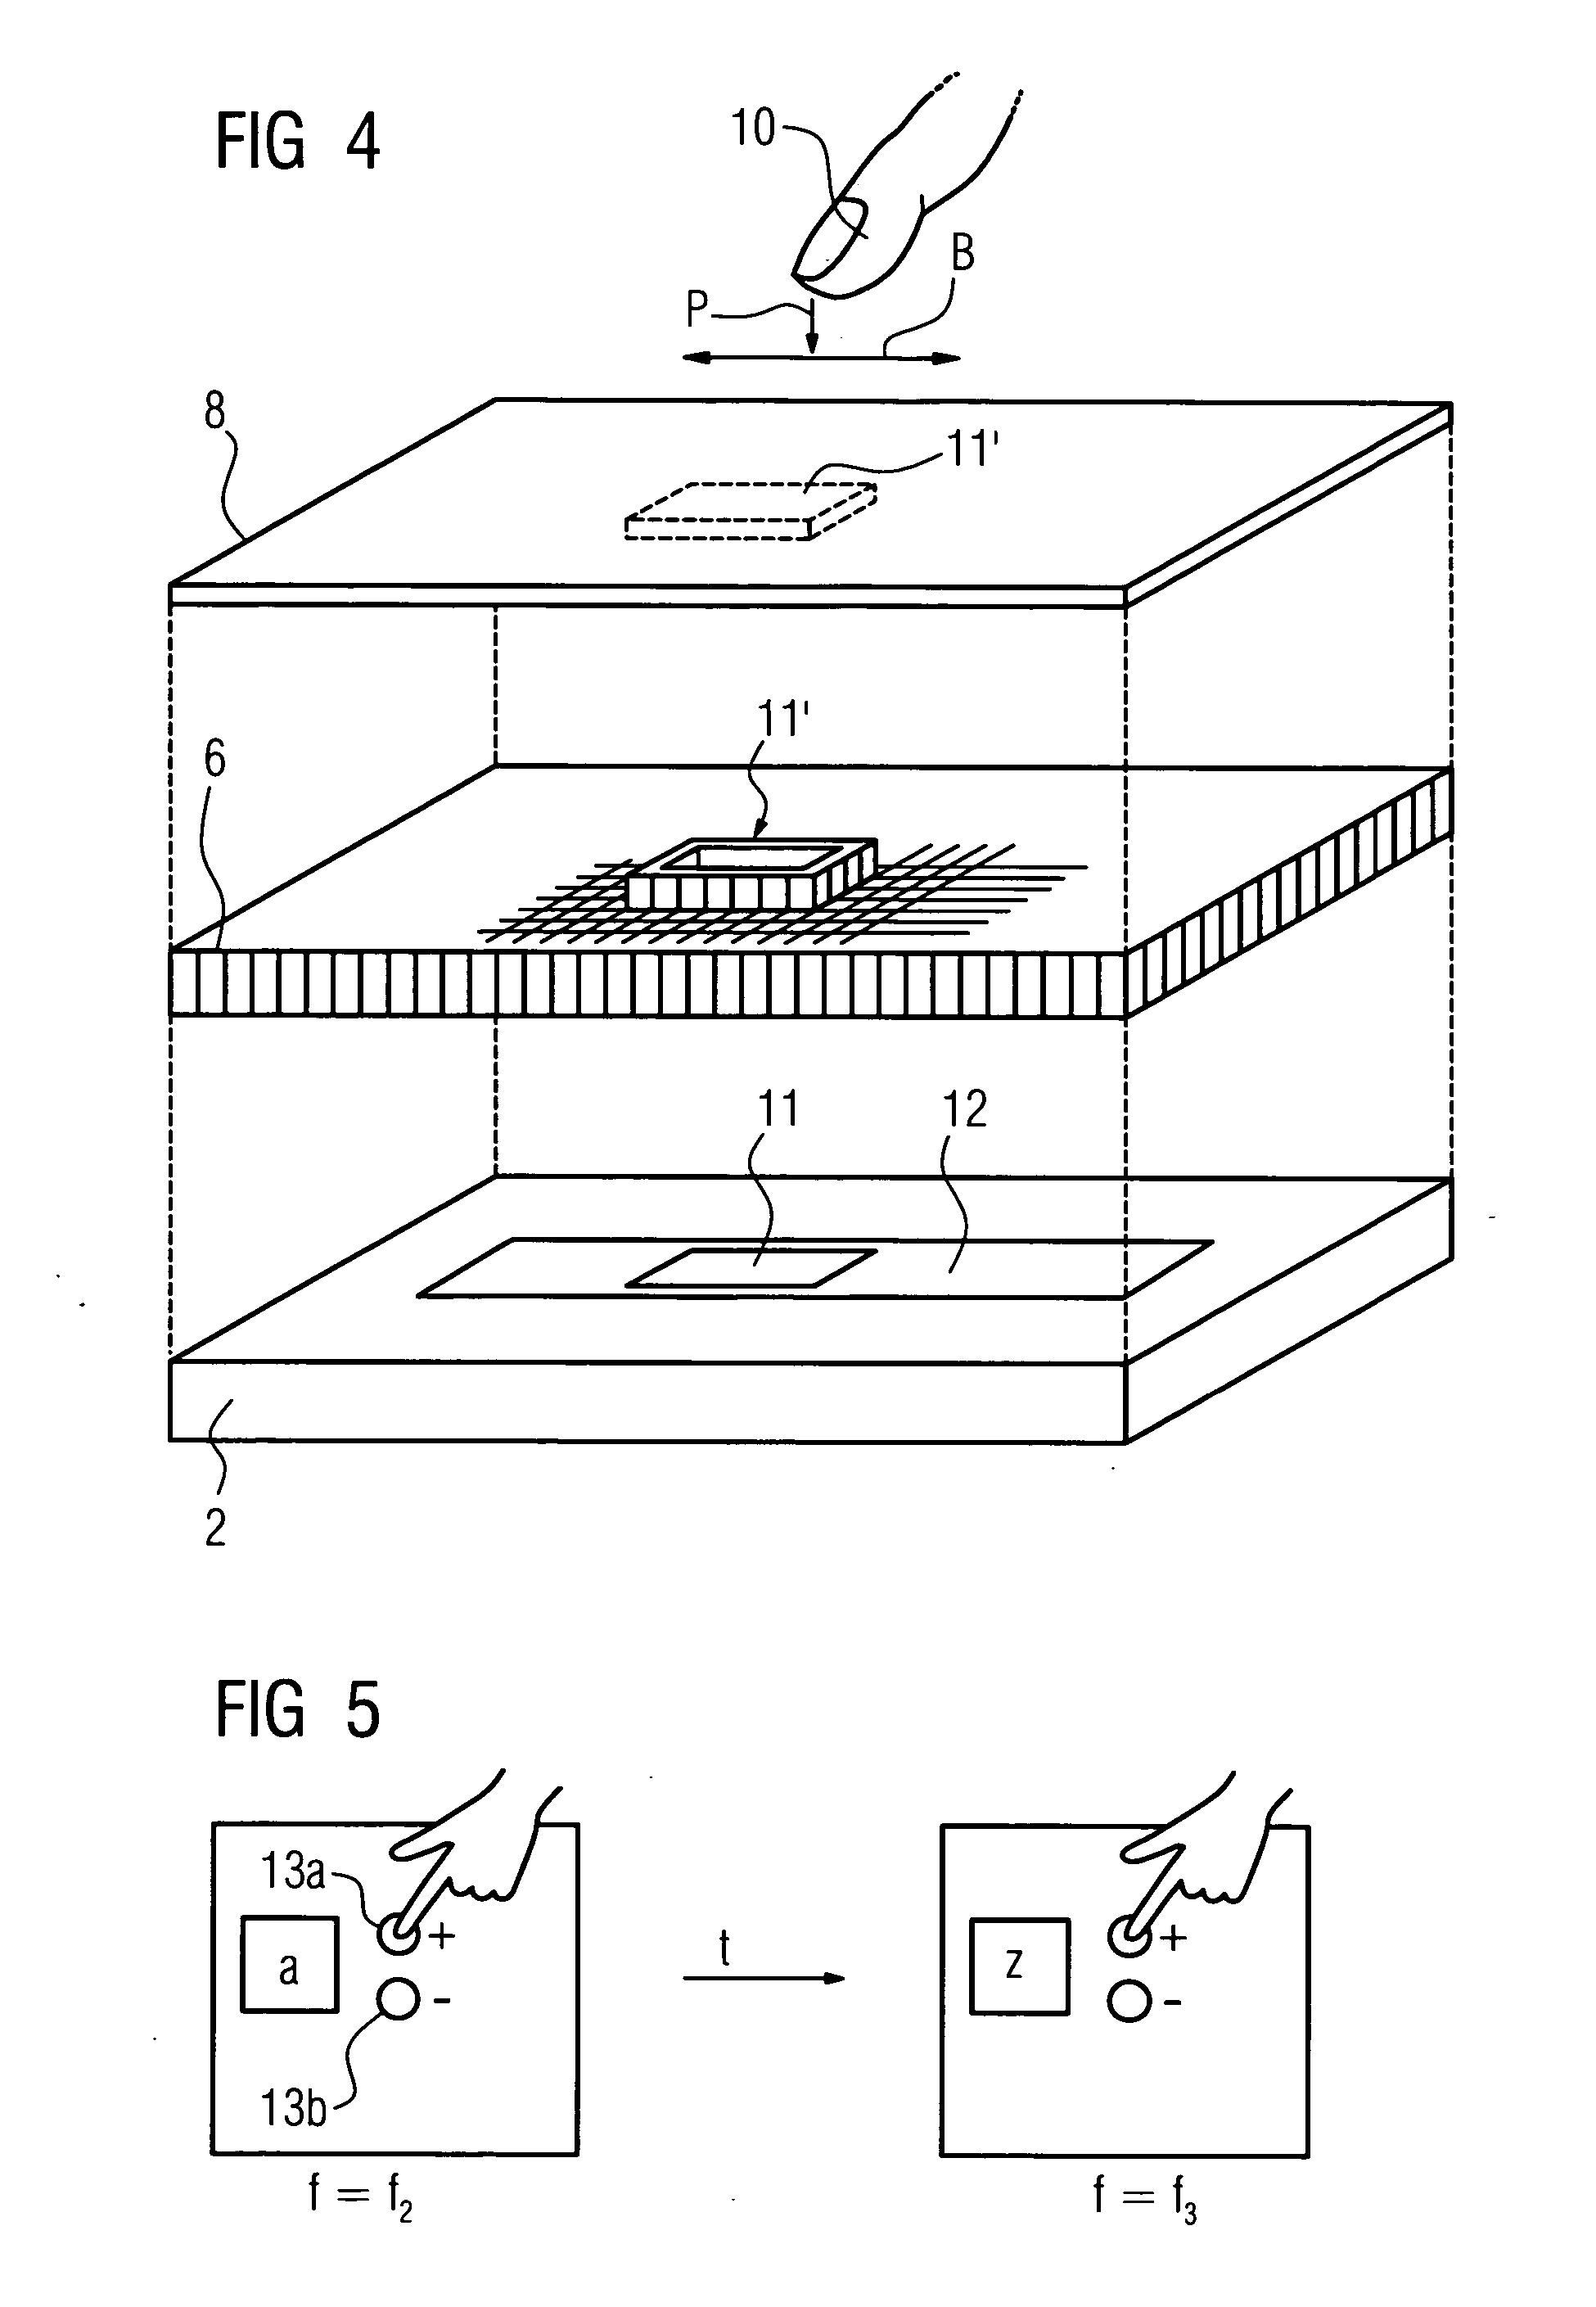 Screen having a touch-sensitive user interface for command input